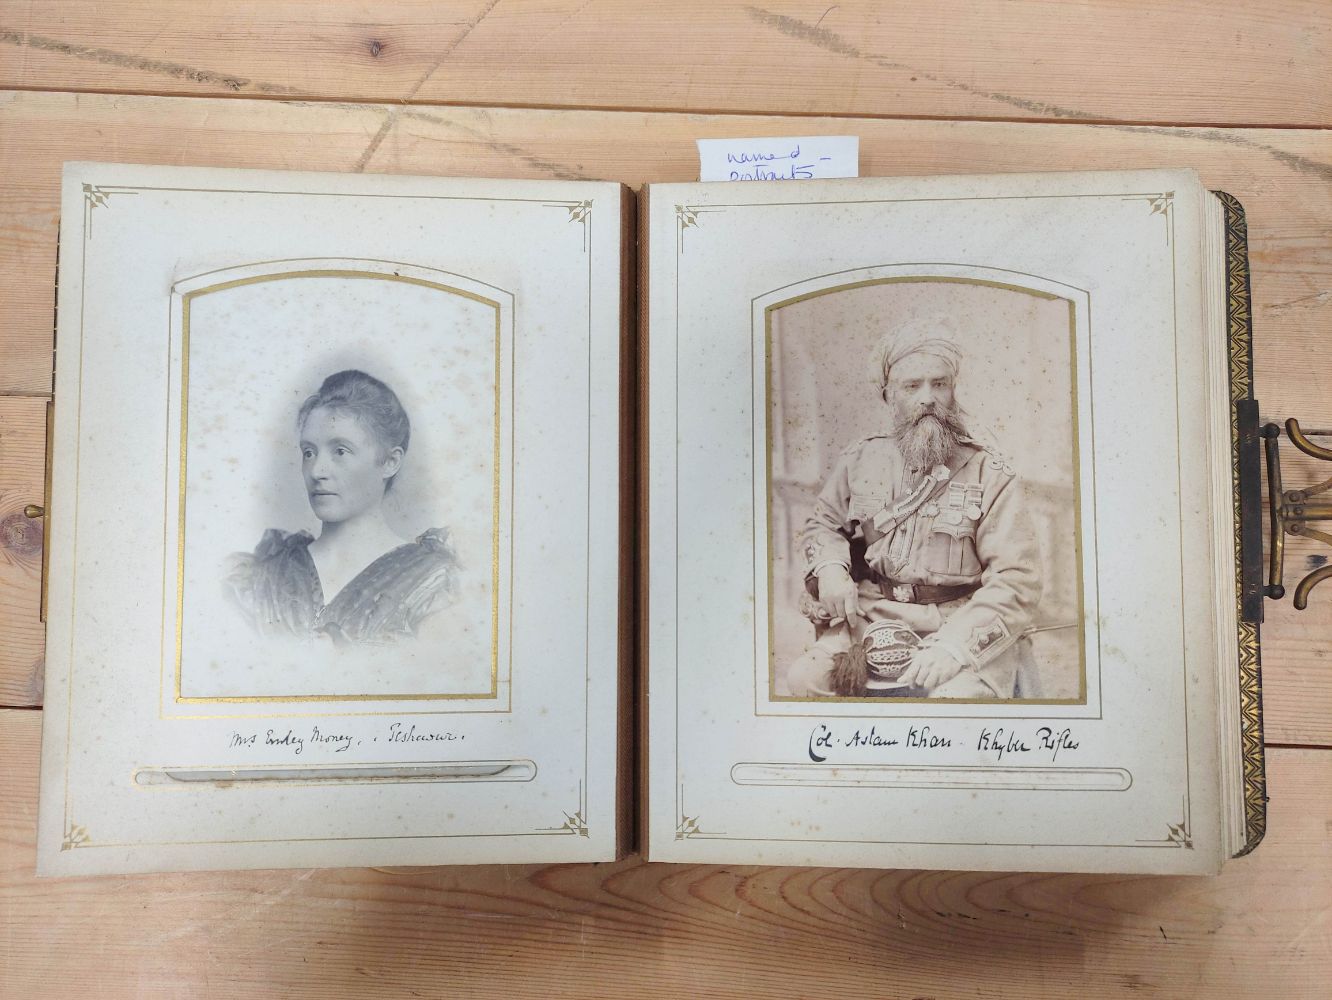 Carlisle -  Antiquarian & Collectable Books & Photography